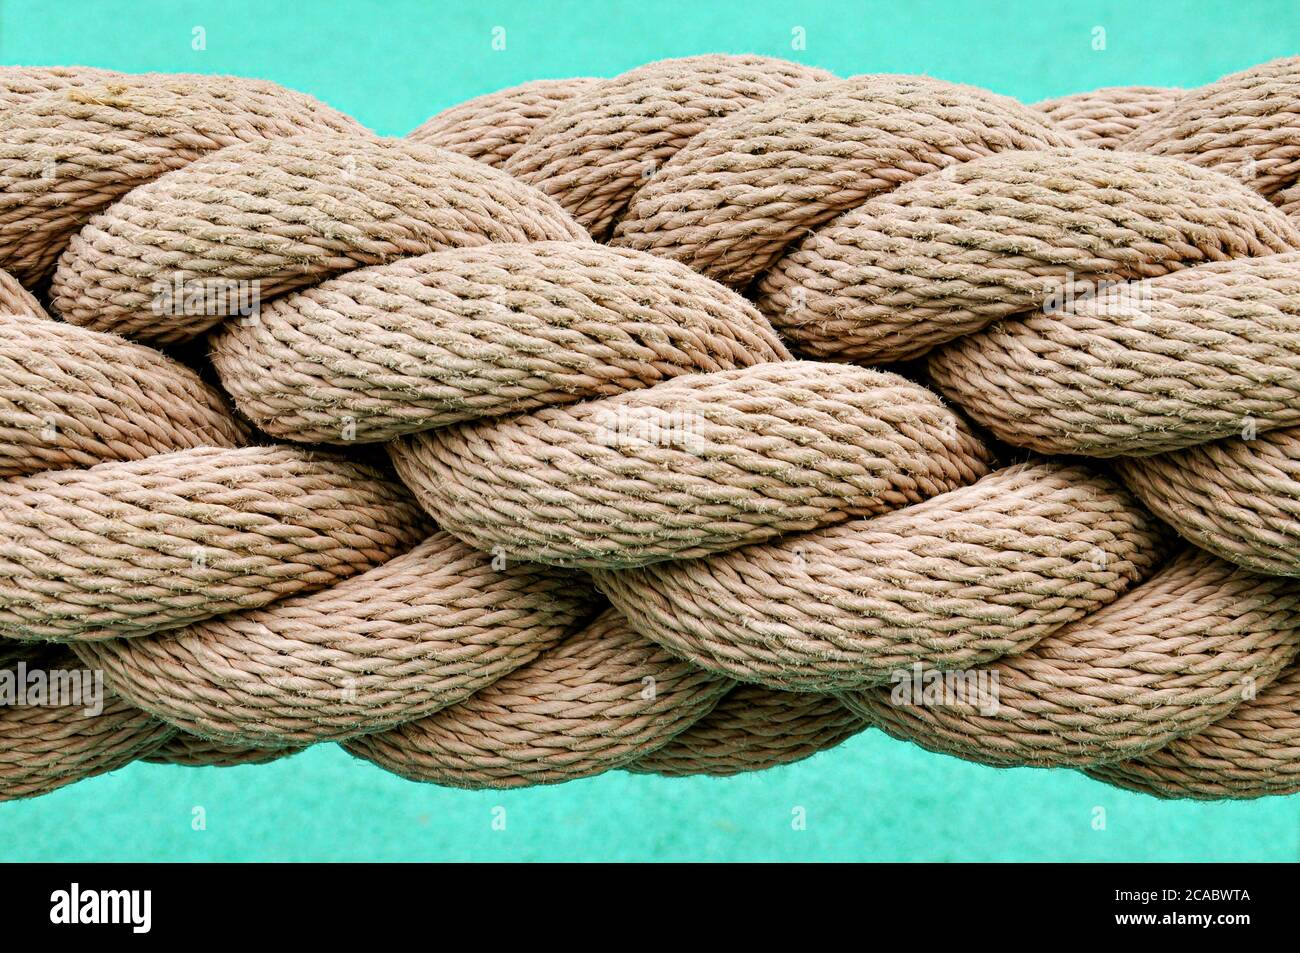 A close up image of a thick industrial rope, with many rope lengths coiled together in a spiral, against a blue background. Stock Photo